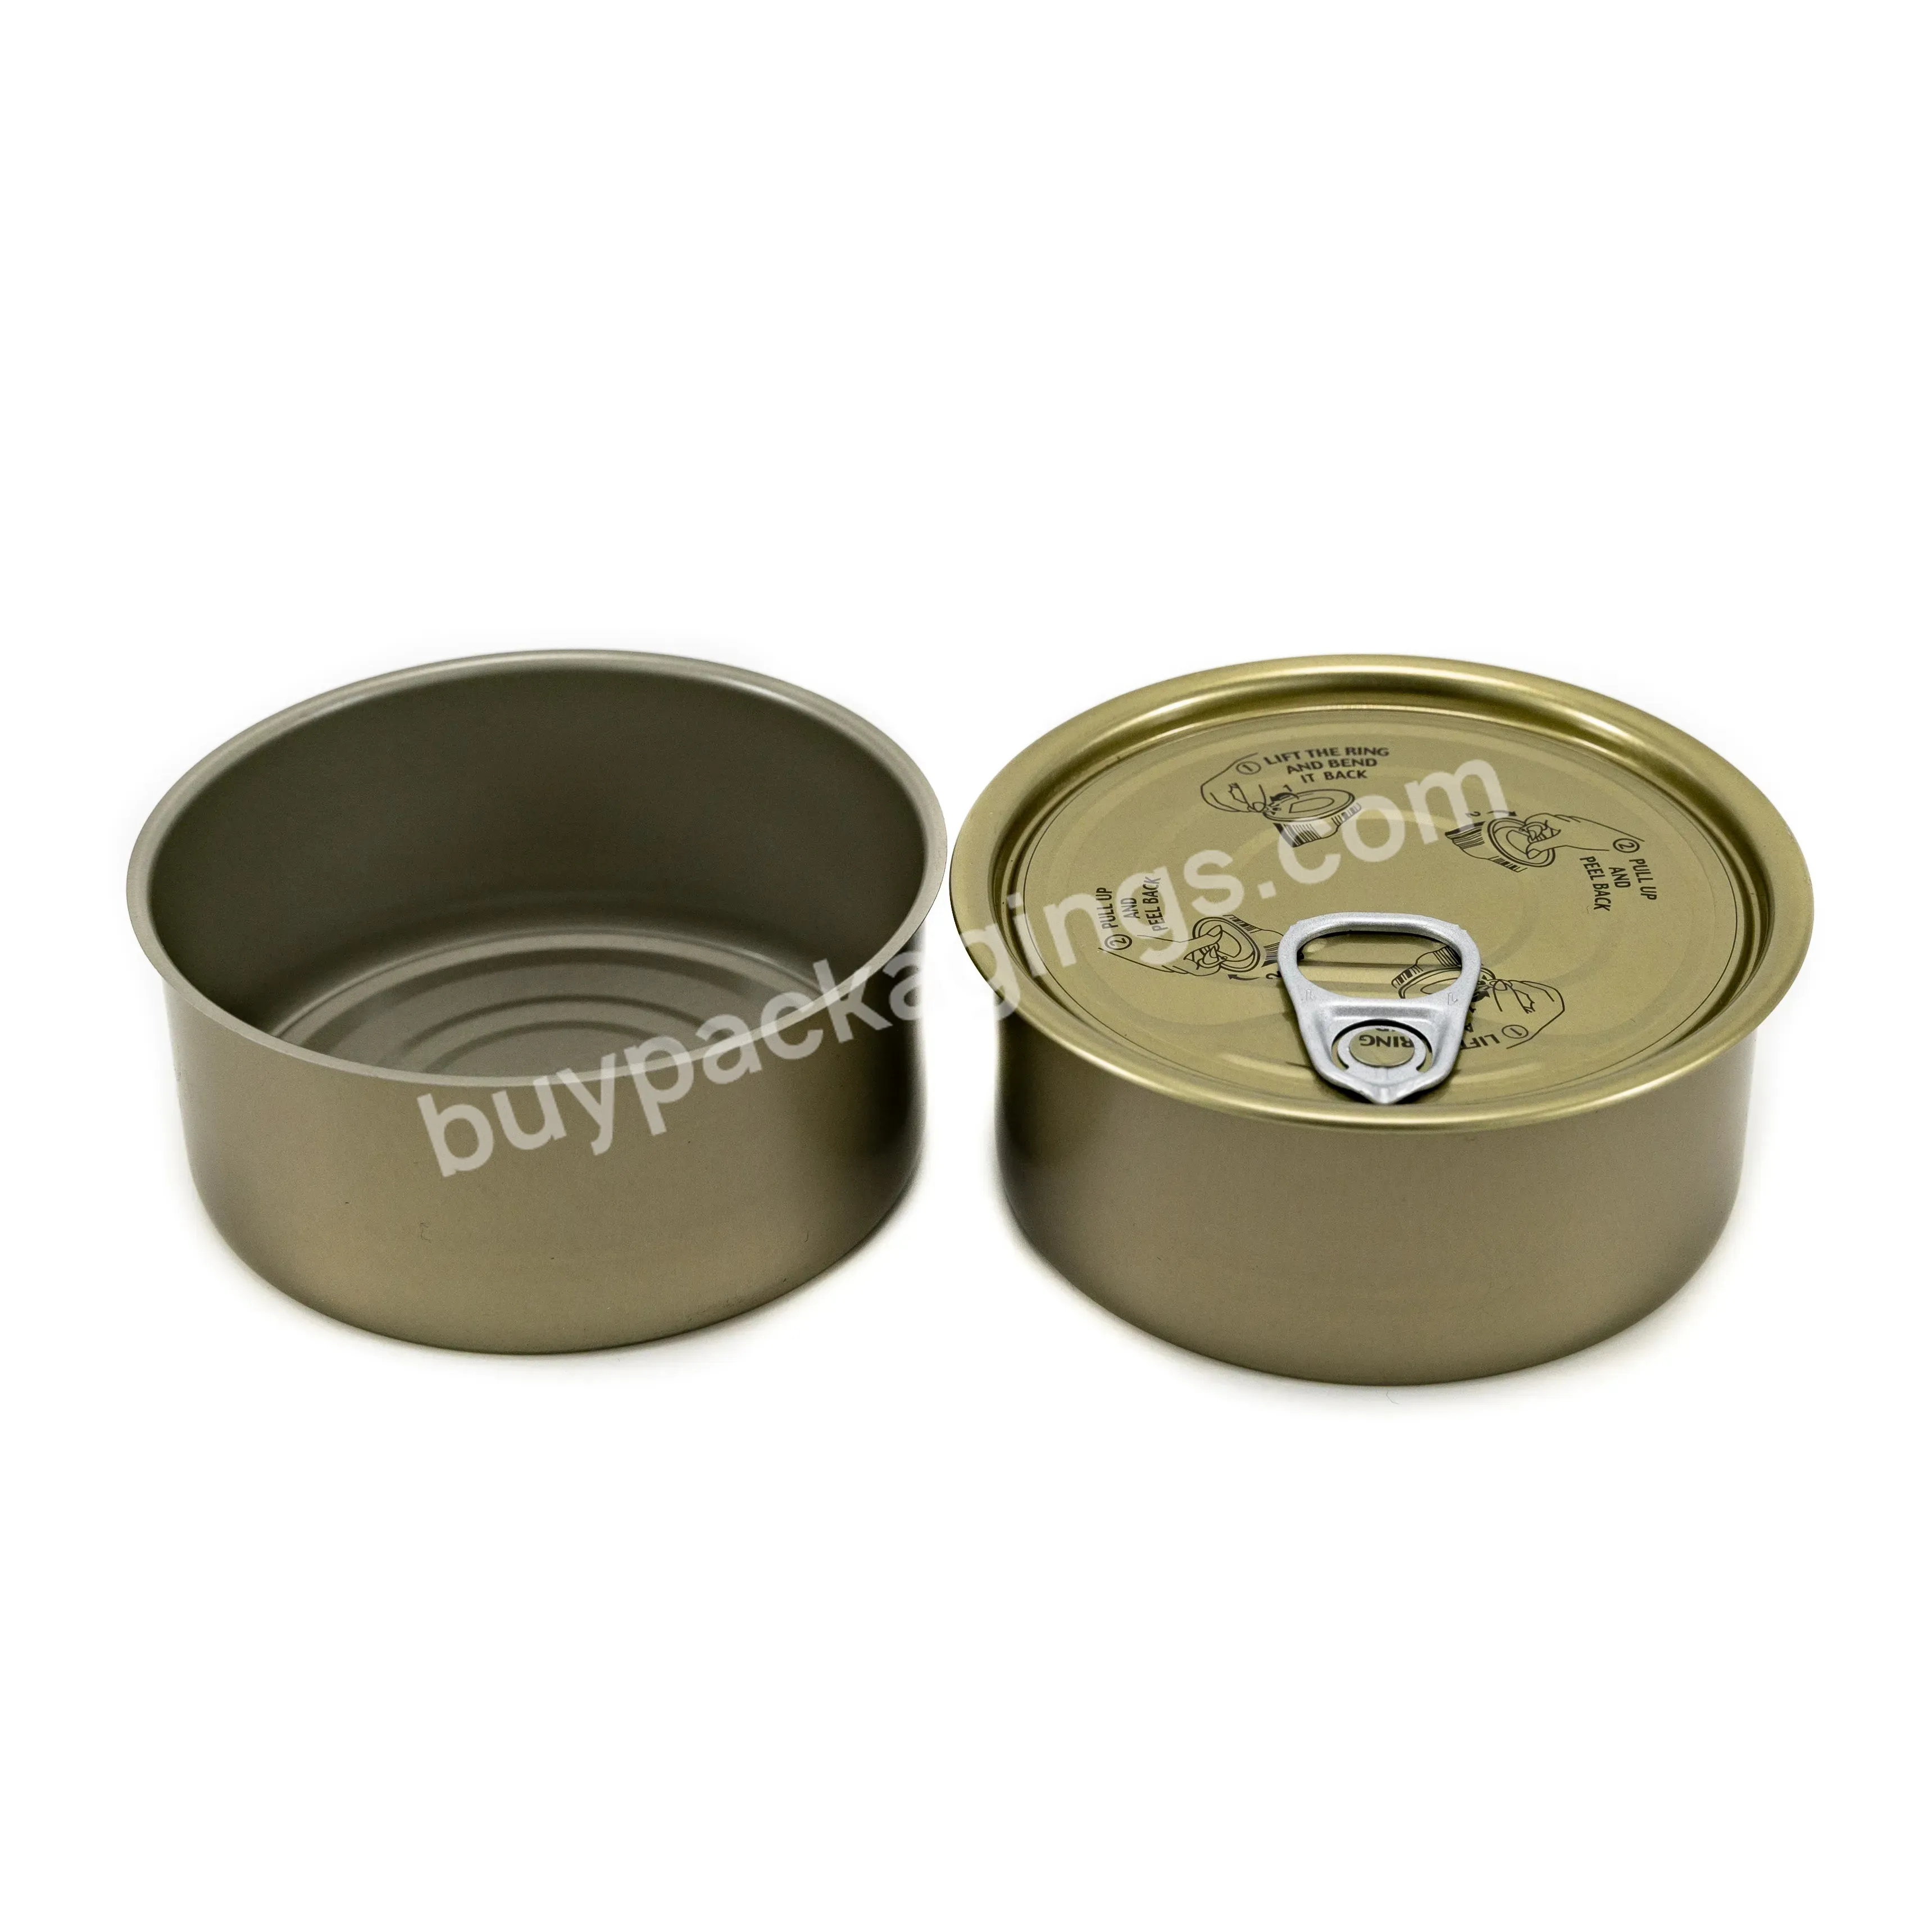 Custom Round Shape Color Printing Empty 85g 100g 170g Tin Cans Wholesale Price For Tuna Fish Canned Meat Food Canning - Buy Factory Wholesale Price Custom Round Print Empty 85g 100ml 170g Tin Cans With #211 #307 Easy Open End For Oil Tuna Pet Food,Ro